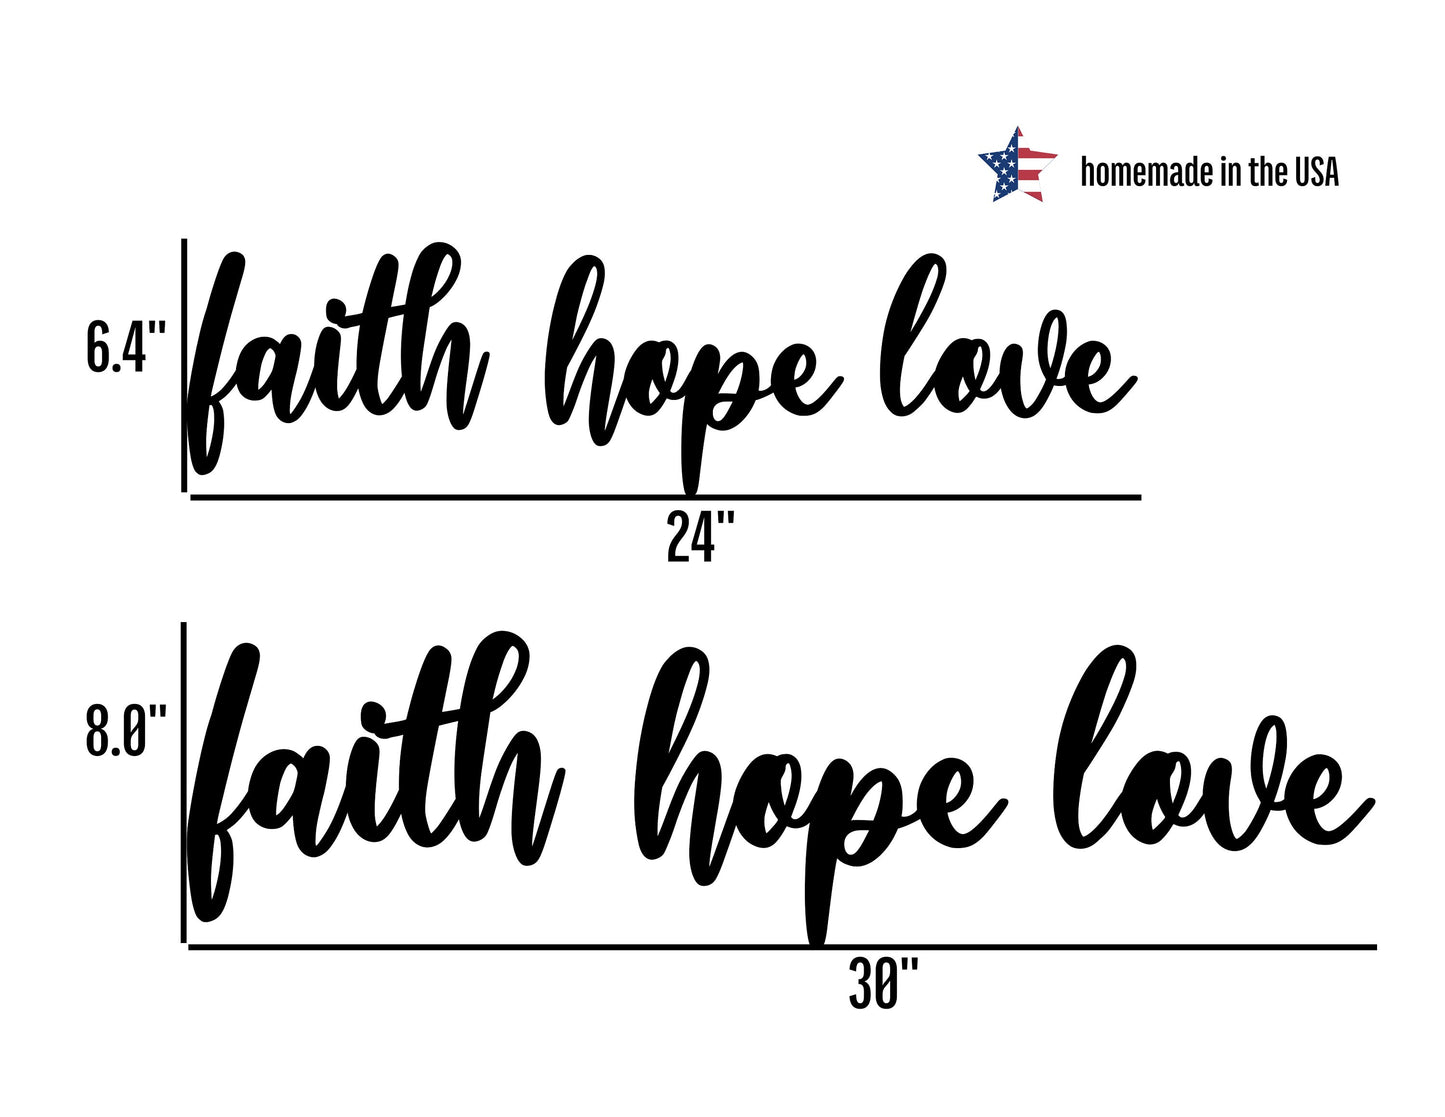 Faith Hope Love Metal Words or Sign | Set of 3 Pieces